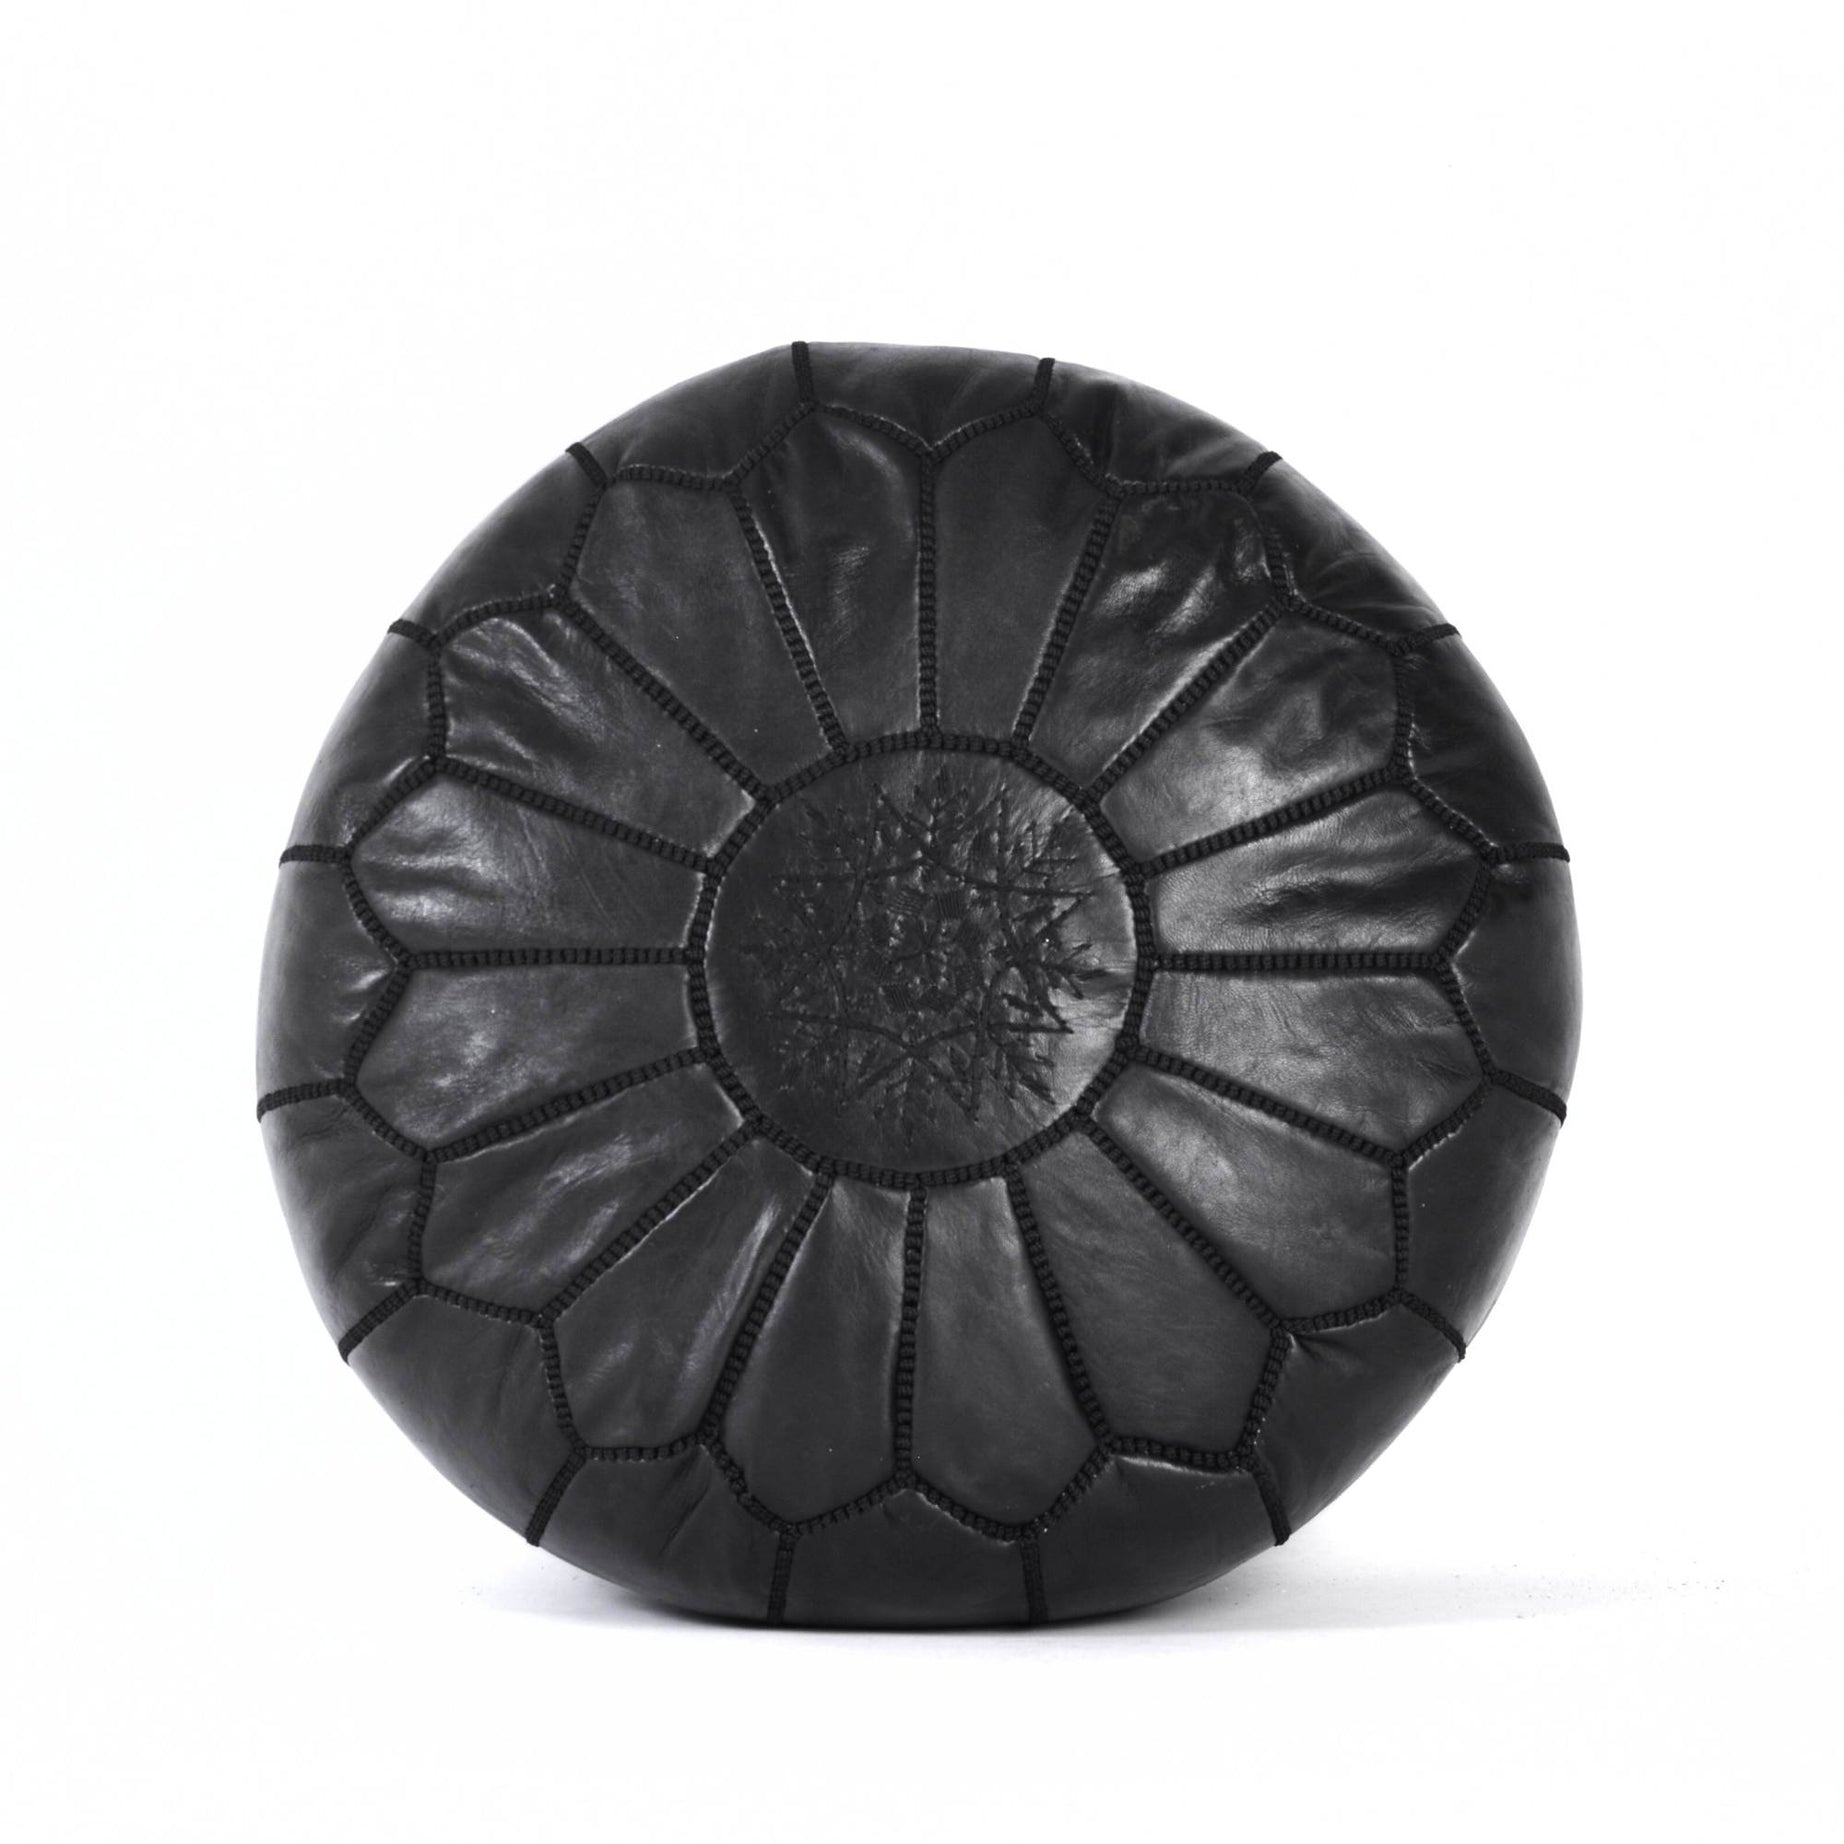 Hand-stitched Embroidery Genuine Leather Ottoman Pouf - Black 2